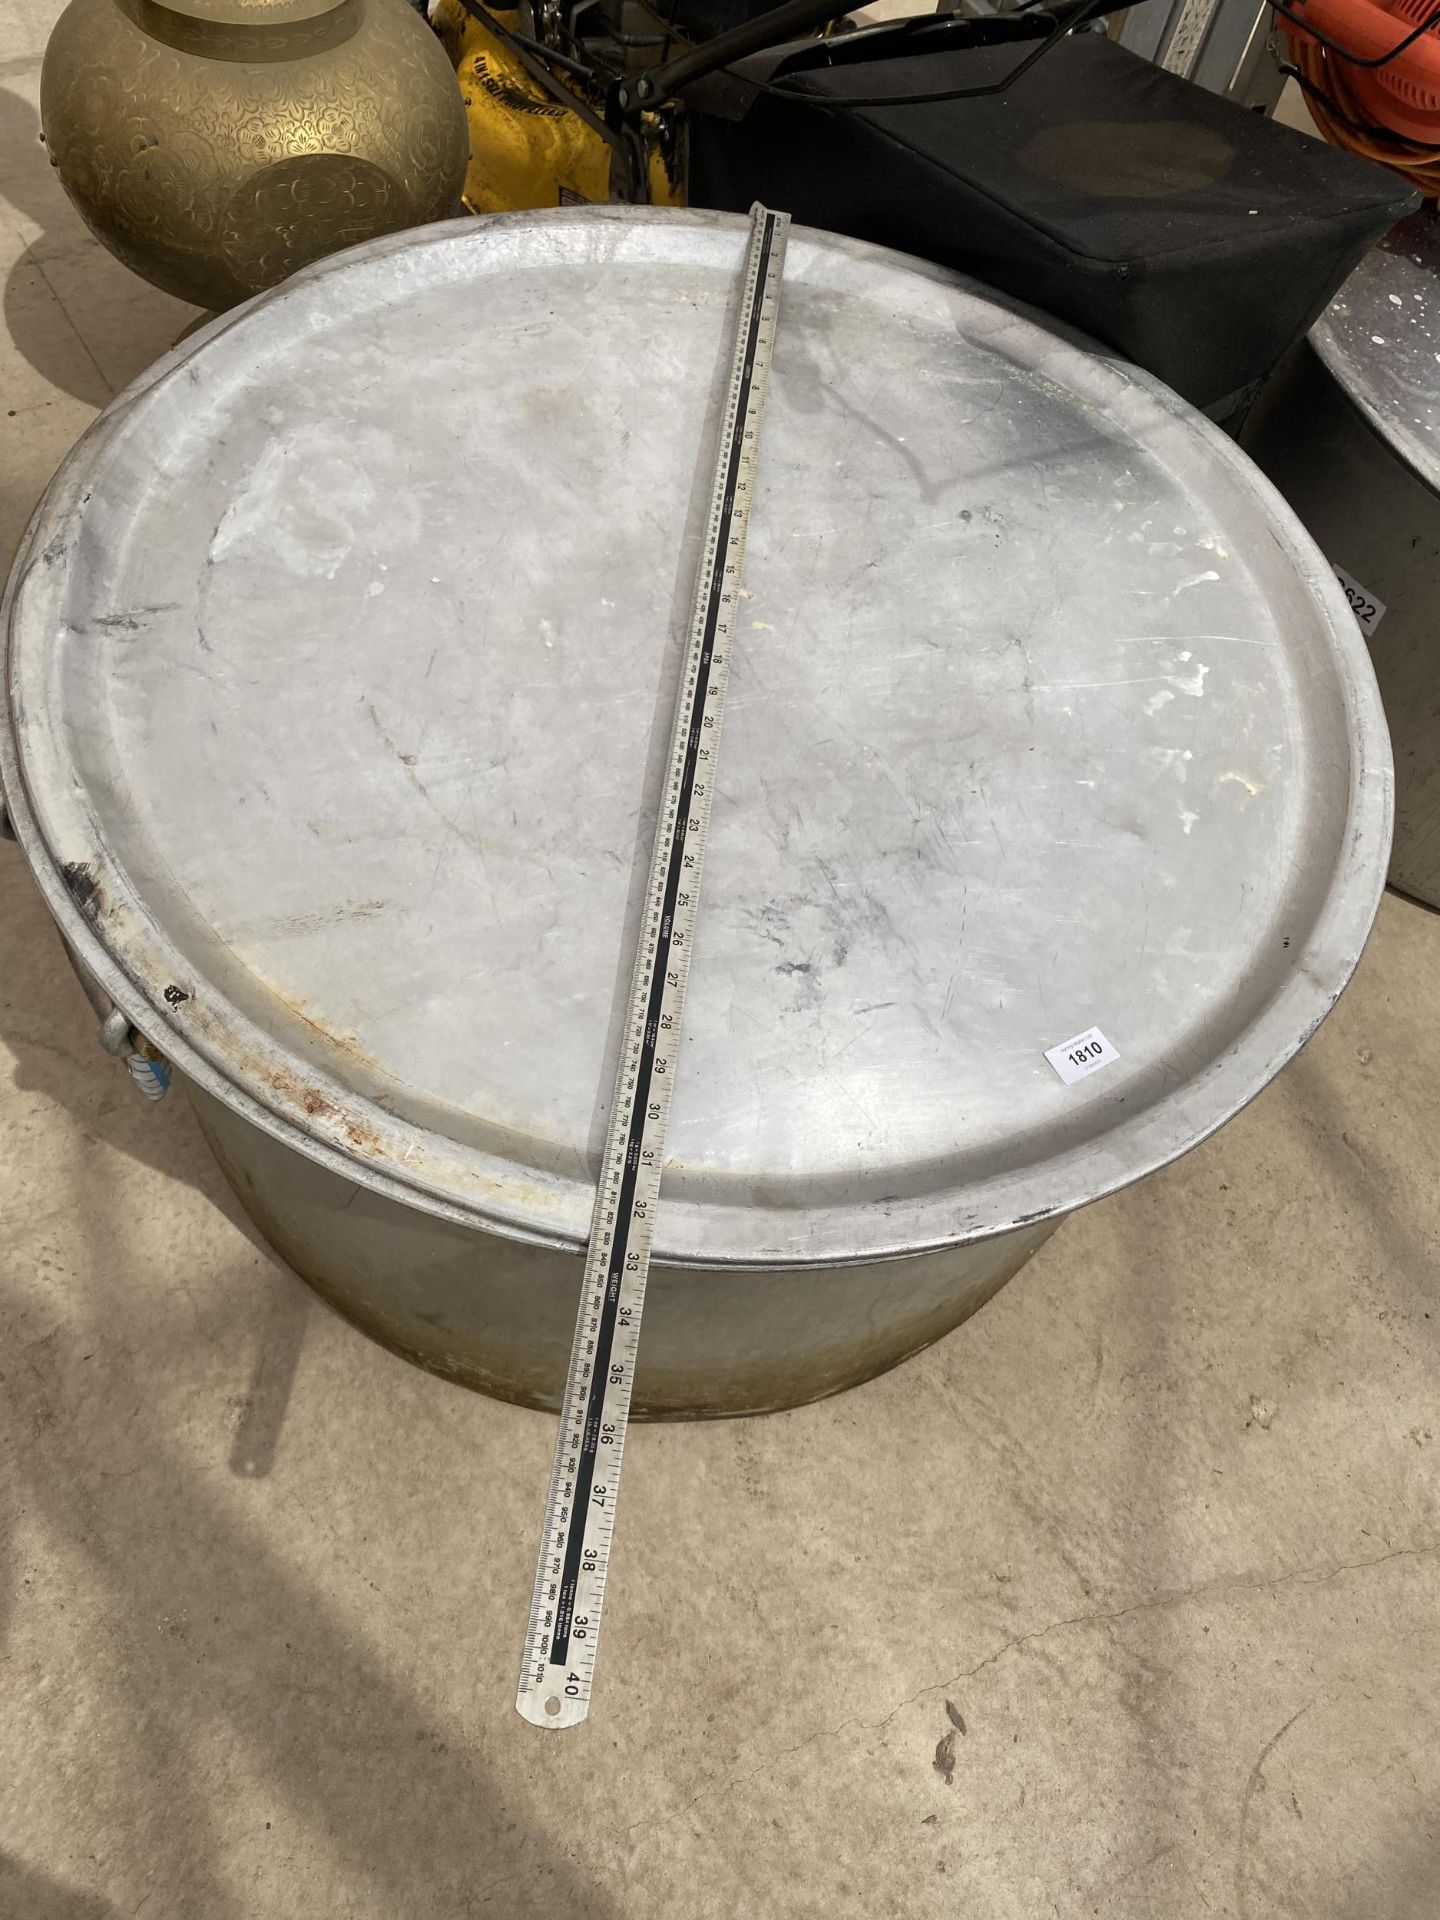 A VERY LARGE STAINLESS STEEL COOKING POT WITH LID - Image 2 of 3